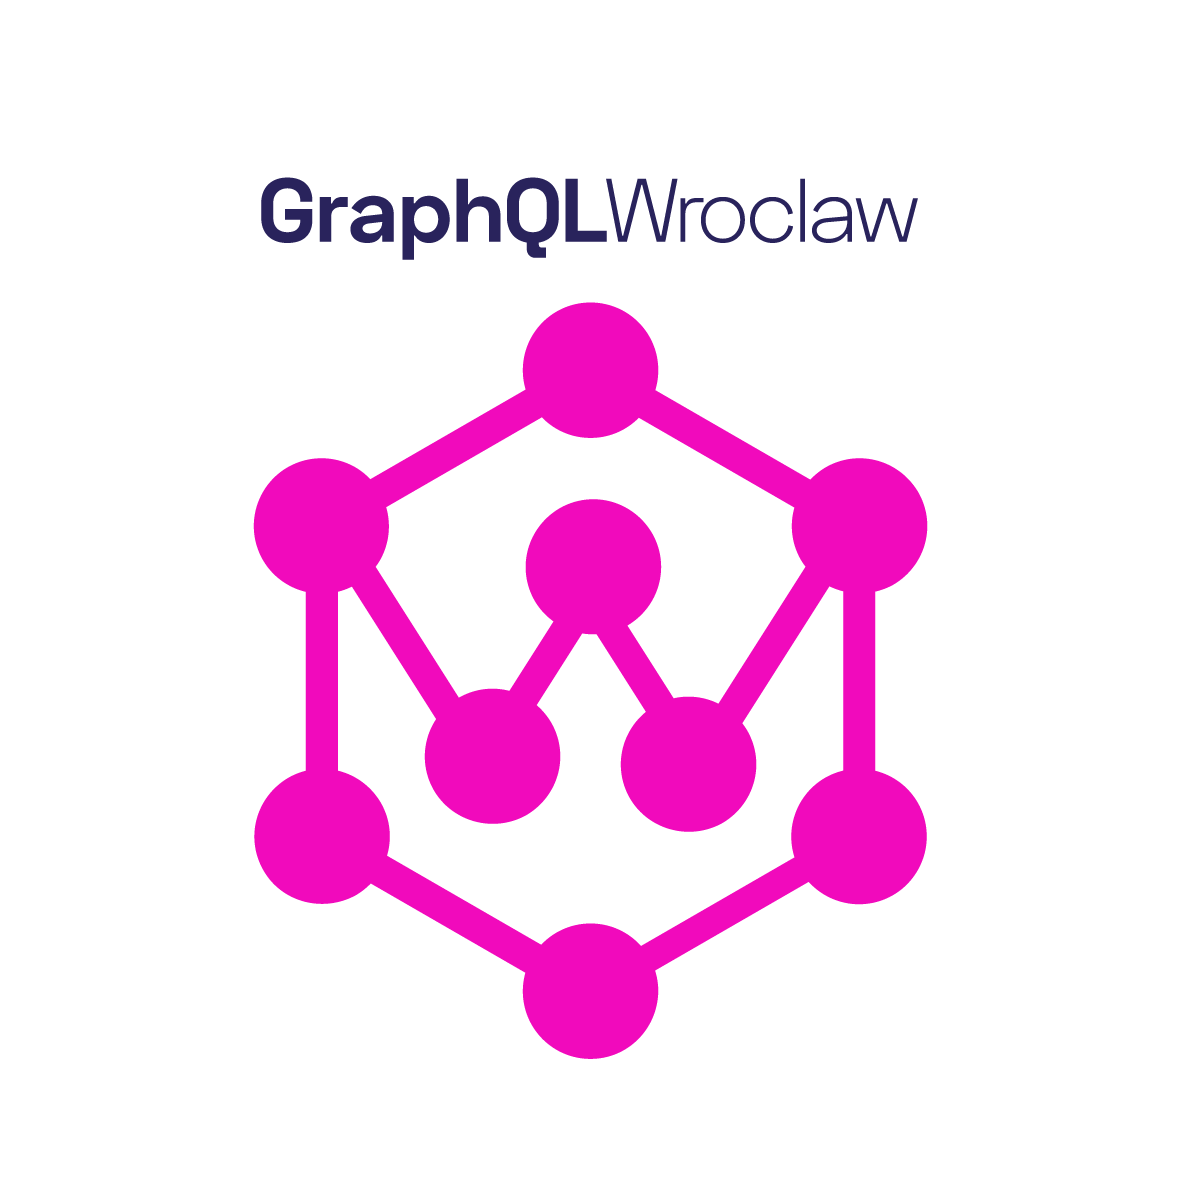 The biggest GraphQL community in Poland. Join our cyclical event in Wroclaw. Organized by @mirumeelabs 🙌 #GraphQLWroclaw